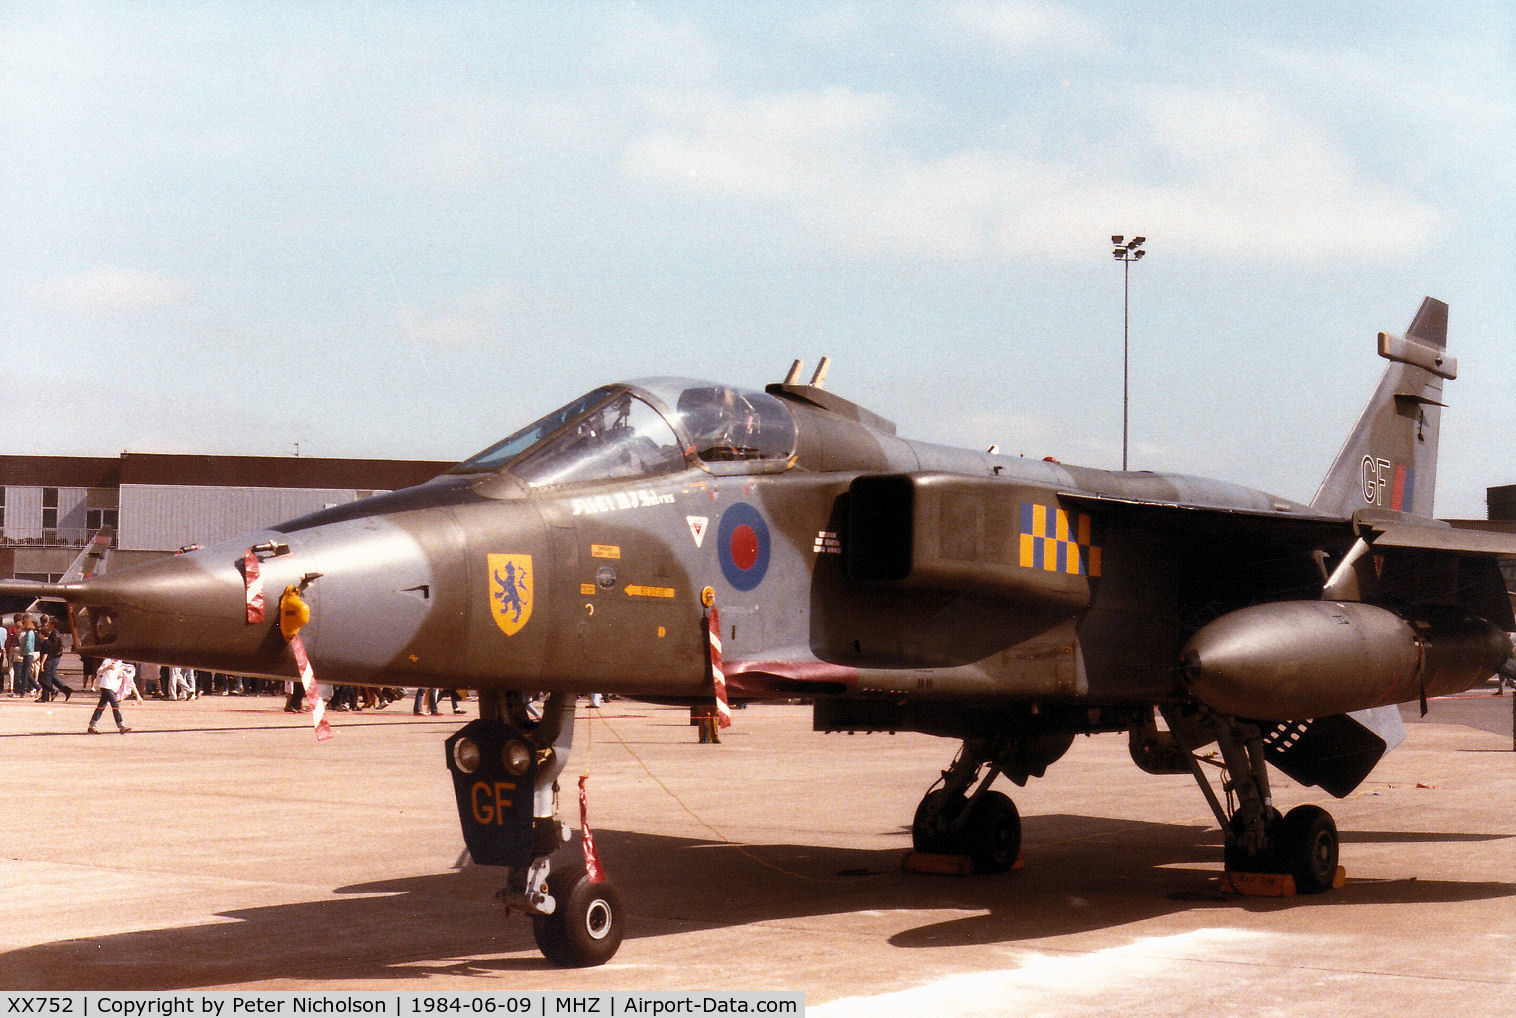 XX752, 1975 Sepecat Jaguar GR.1A C/N S.49, Another view of the Jaguar GR.1 of RAF Coltishall's 54 Squadron on display at the 1984 RAF Mildenhall Air Fete.